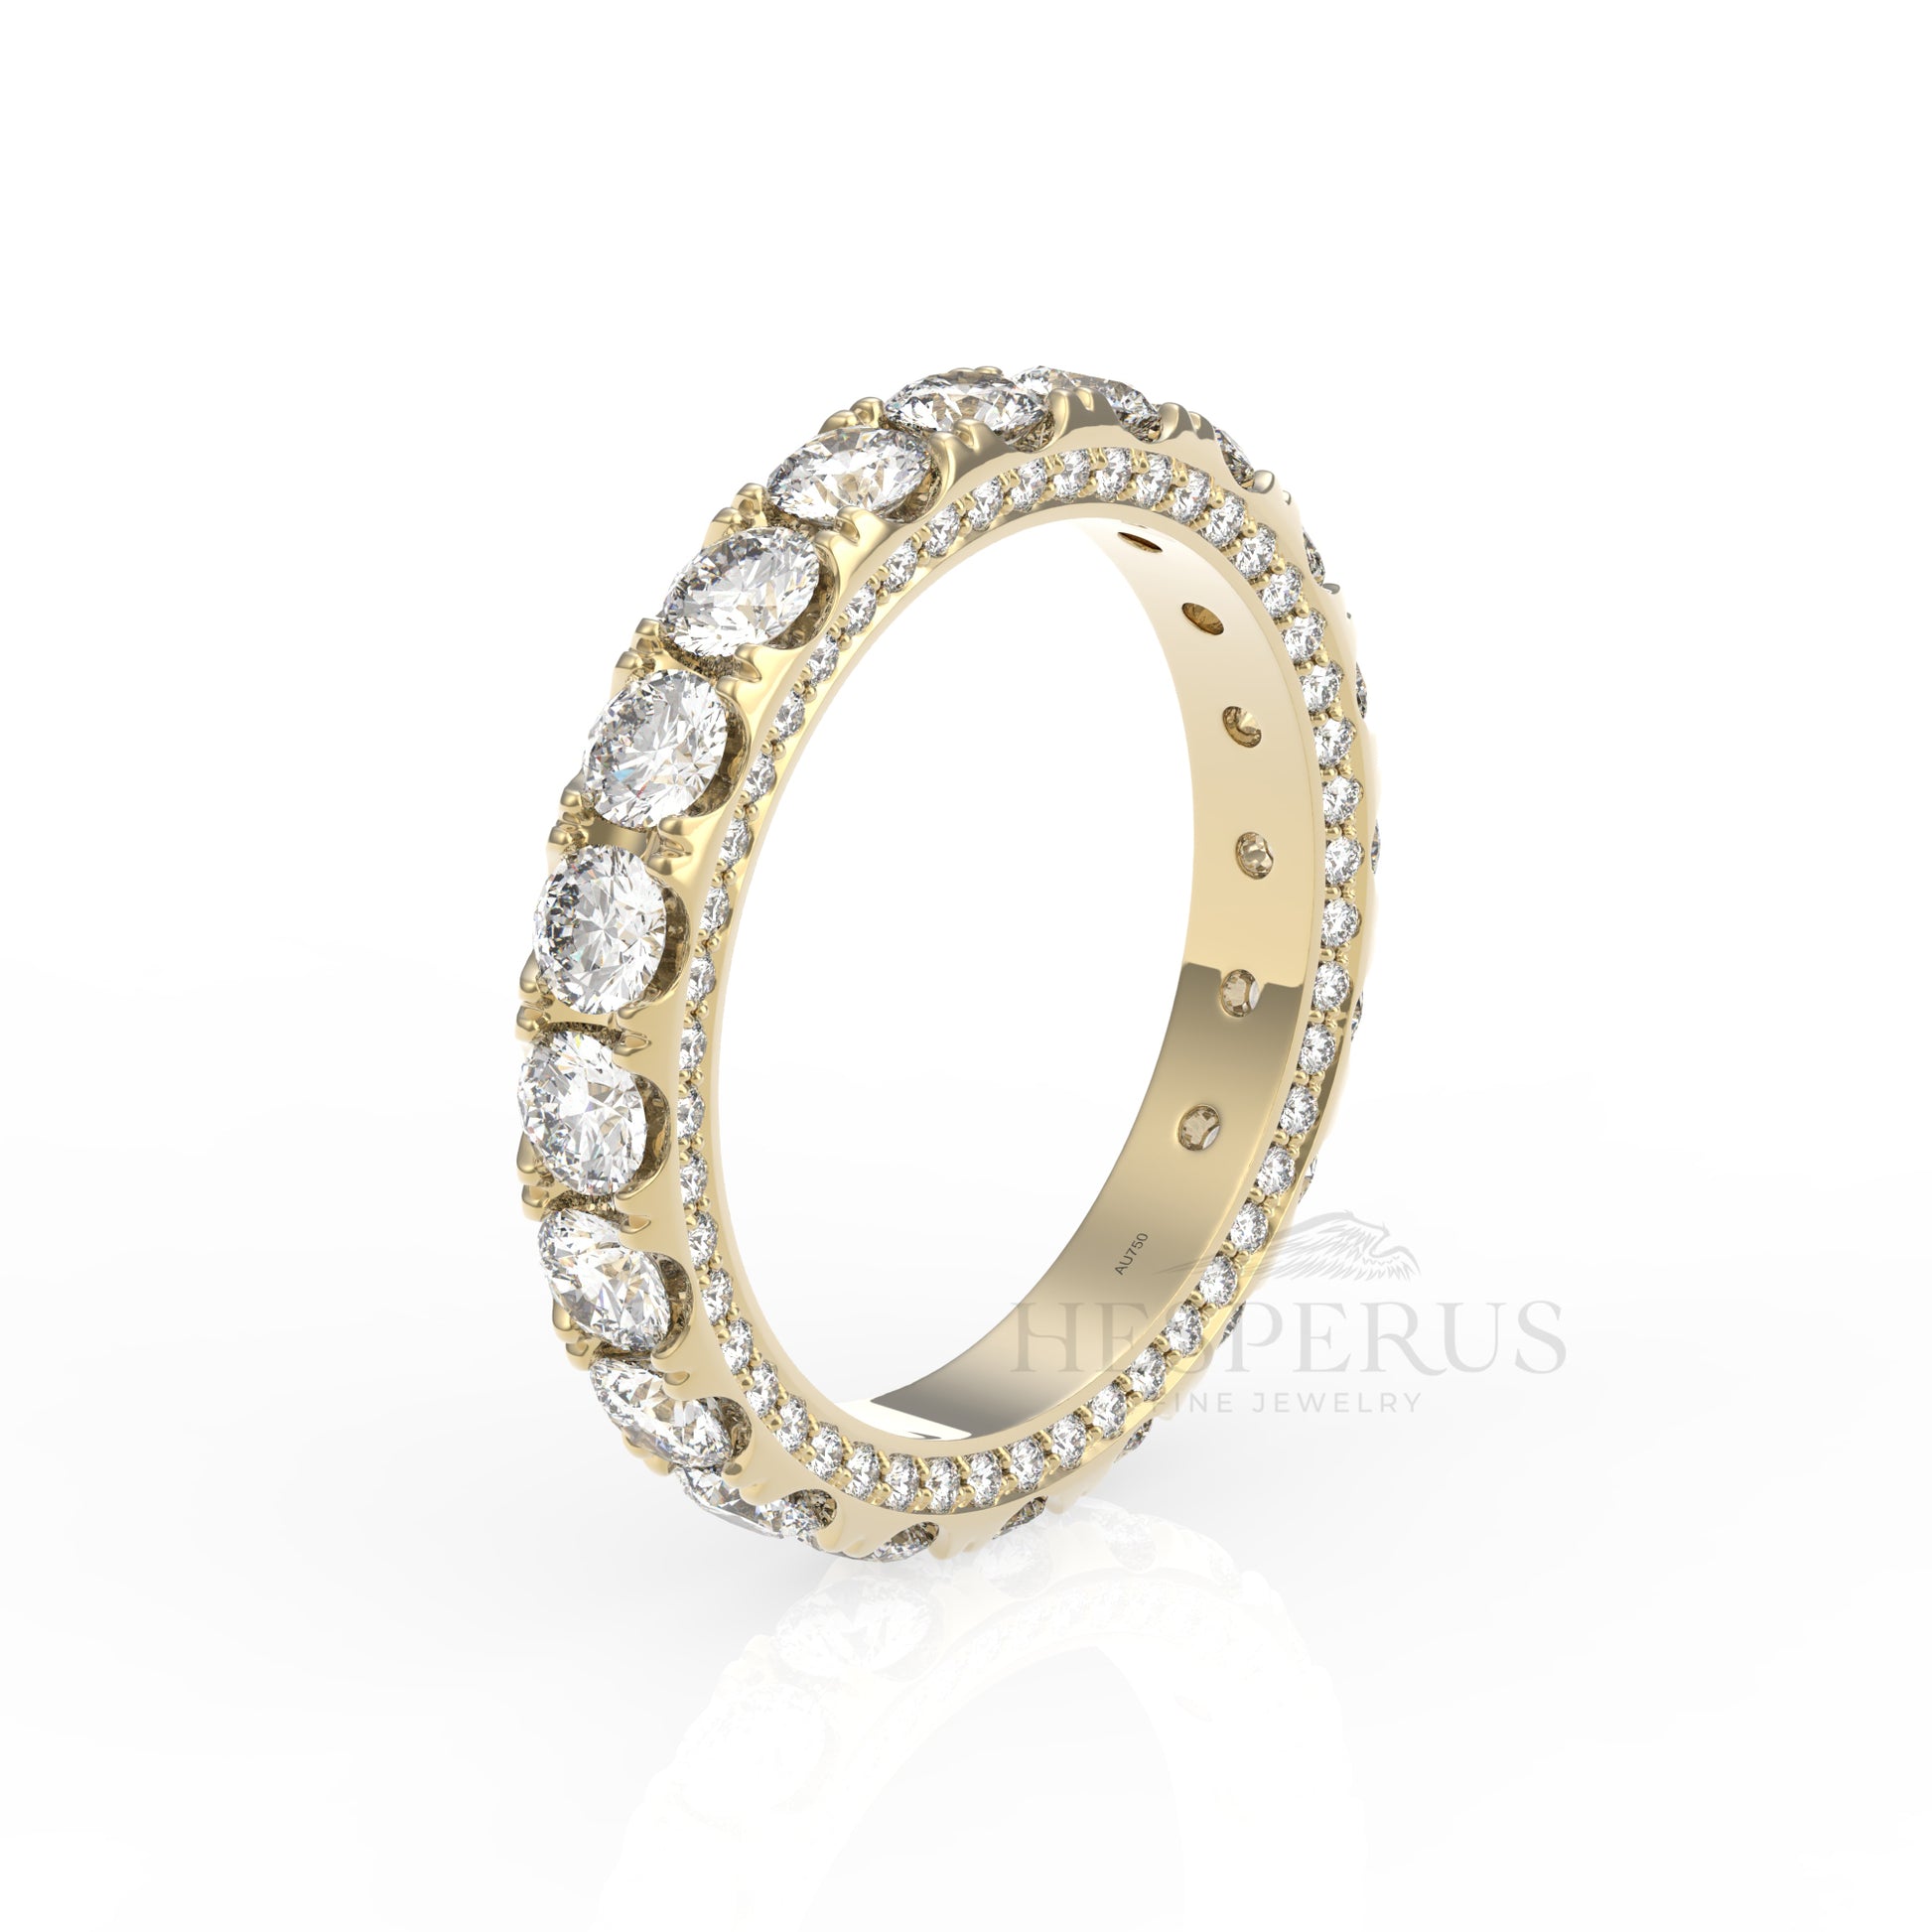 The Forever band-Hesperus Fine Jewelry